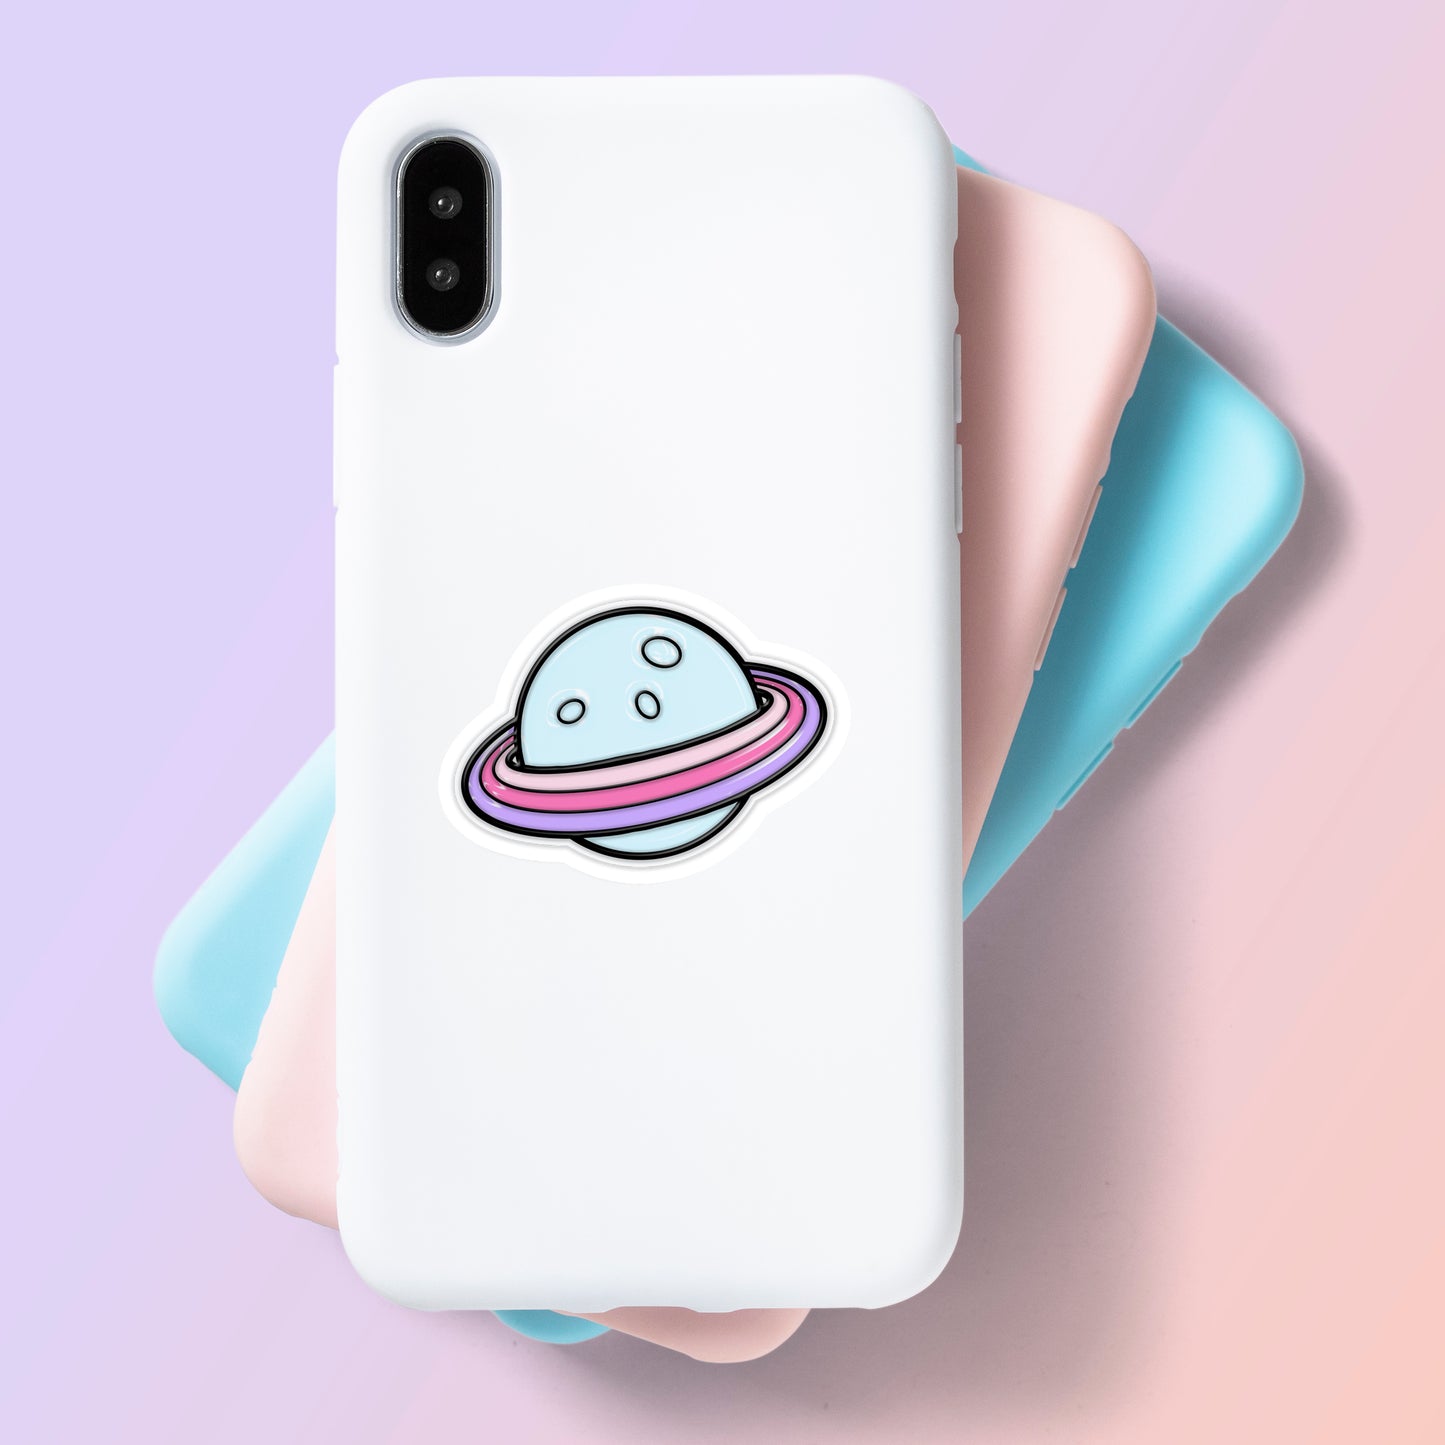 Cute Planet - Laptop & Mobile Stickers